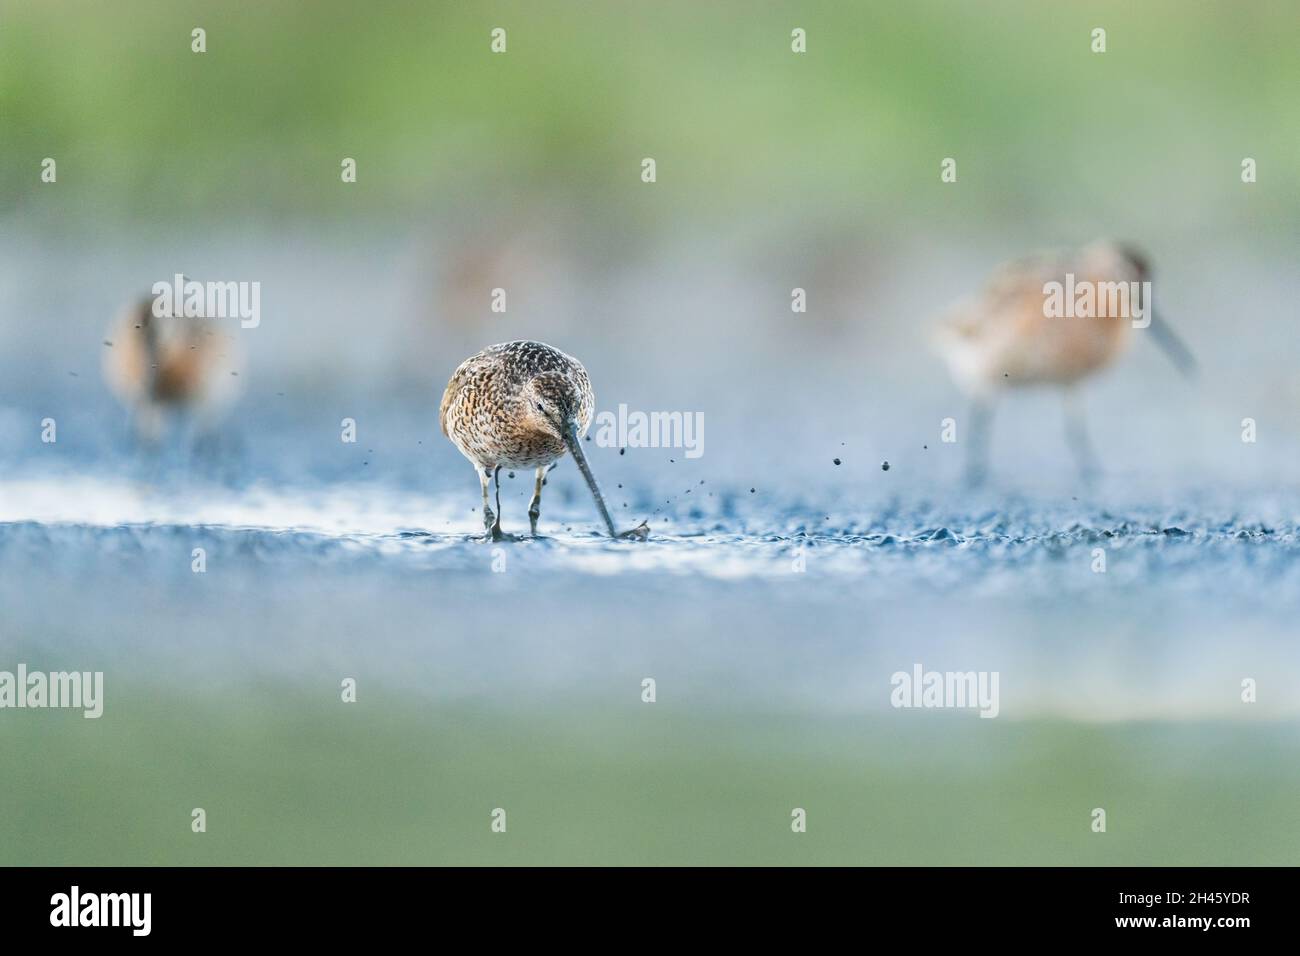 Short-billed Dowitcher splashing a mud with its long bill as it walks across the mudflats in search for food New Jersey, USA Stock Photo